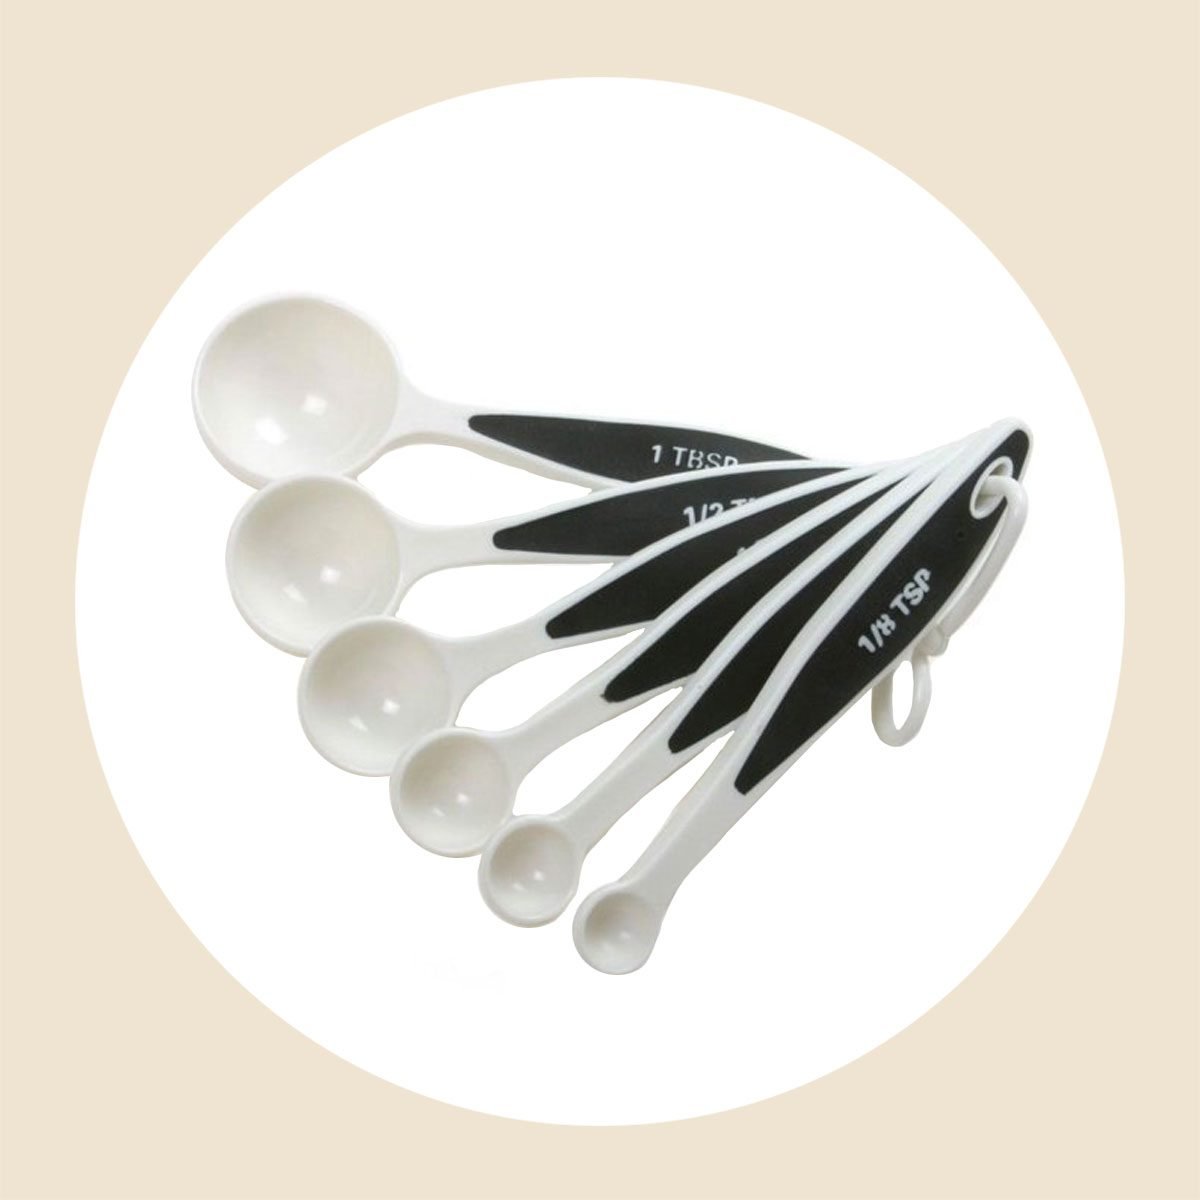 Measuring Spoons Stainless Steel Measuring Spoons Set Of 10 And 1 Egg  Beater For Measuring Dry And Liquid Ingredients Cooking Baking Tablespoon  Teaspoon Metal Measuring Spoon (11 Pieces) 